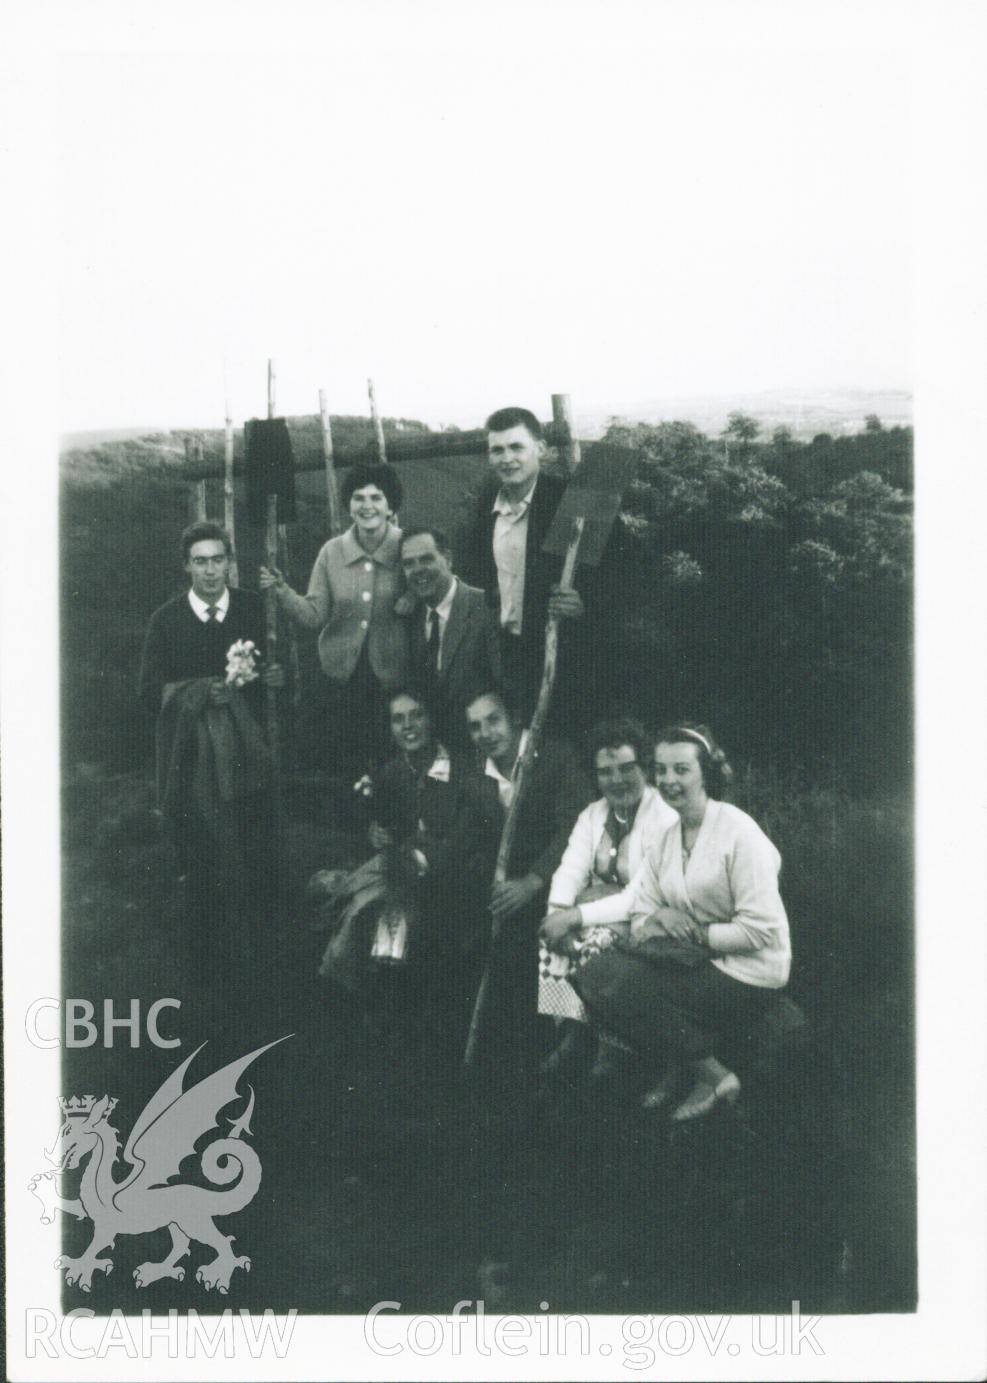 Black and white photograph of young people's walk on Margam Mountain to Bodvoc Stone, circa. 1955. Donated to the RCAHMW by Cyril Philips as part of the Digital Dissent Project.